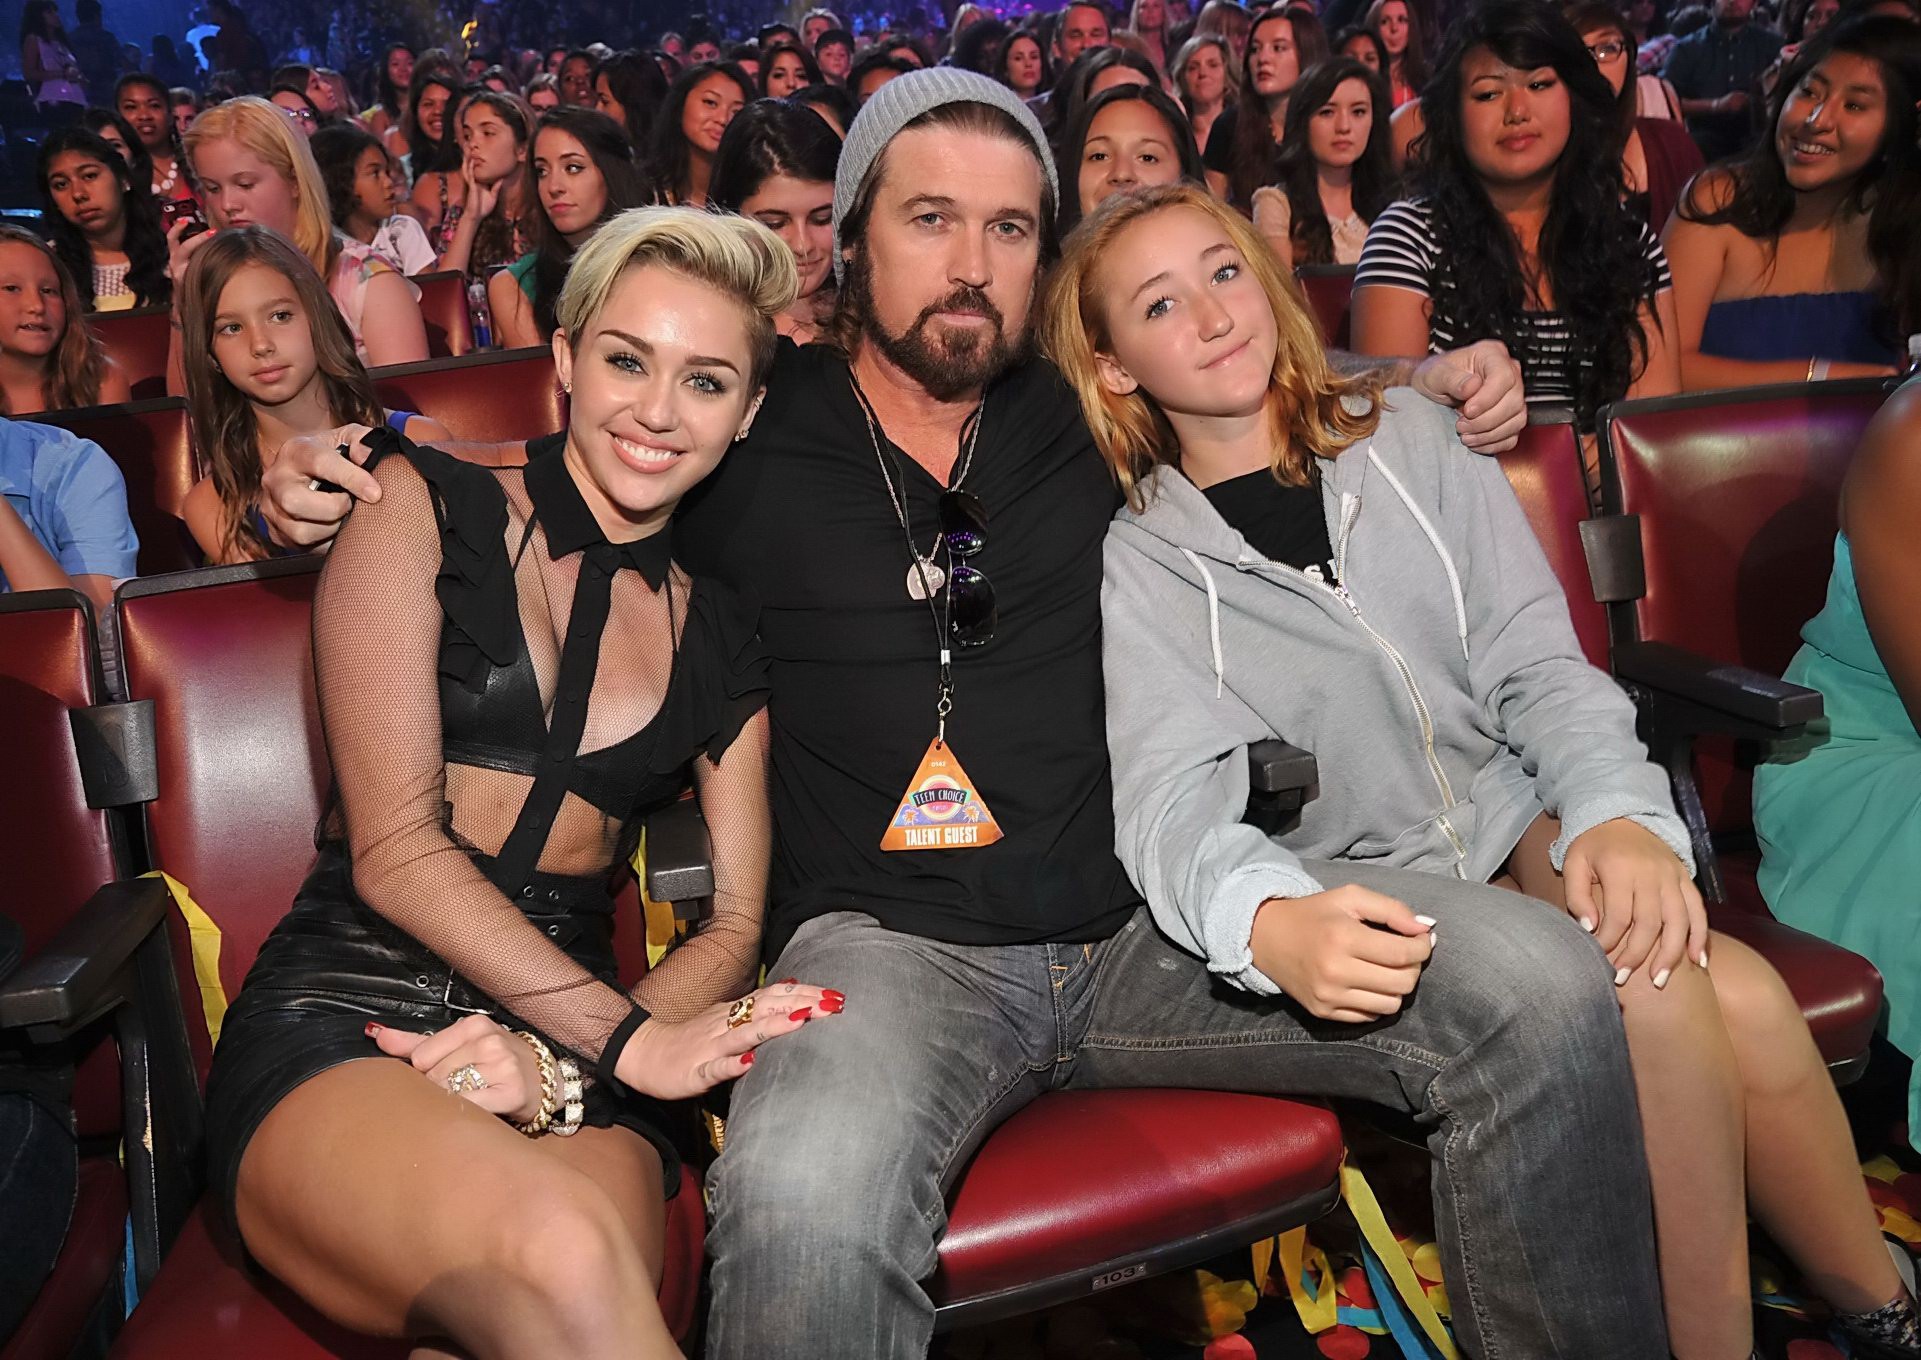 Miley Cyrus wearing black leather bra and mikro skirt at 2013 Teen Choice awards #75222033